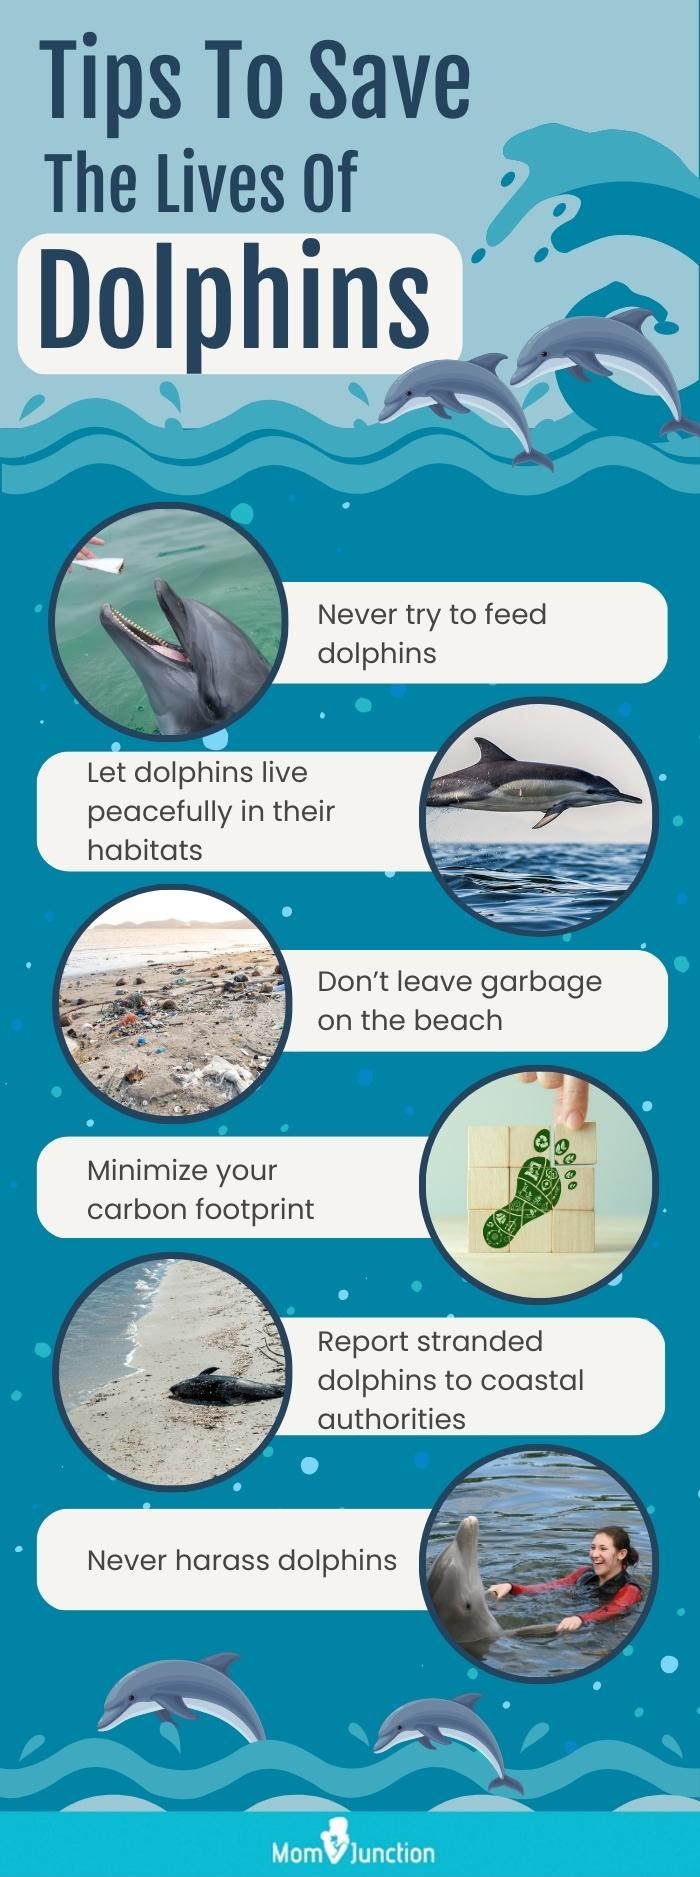 tips to save the lives of dolphins (infographic)